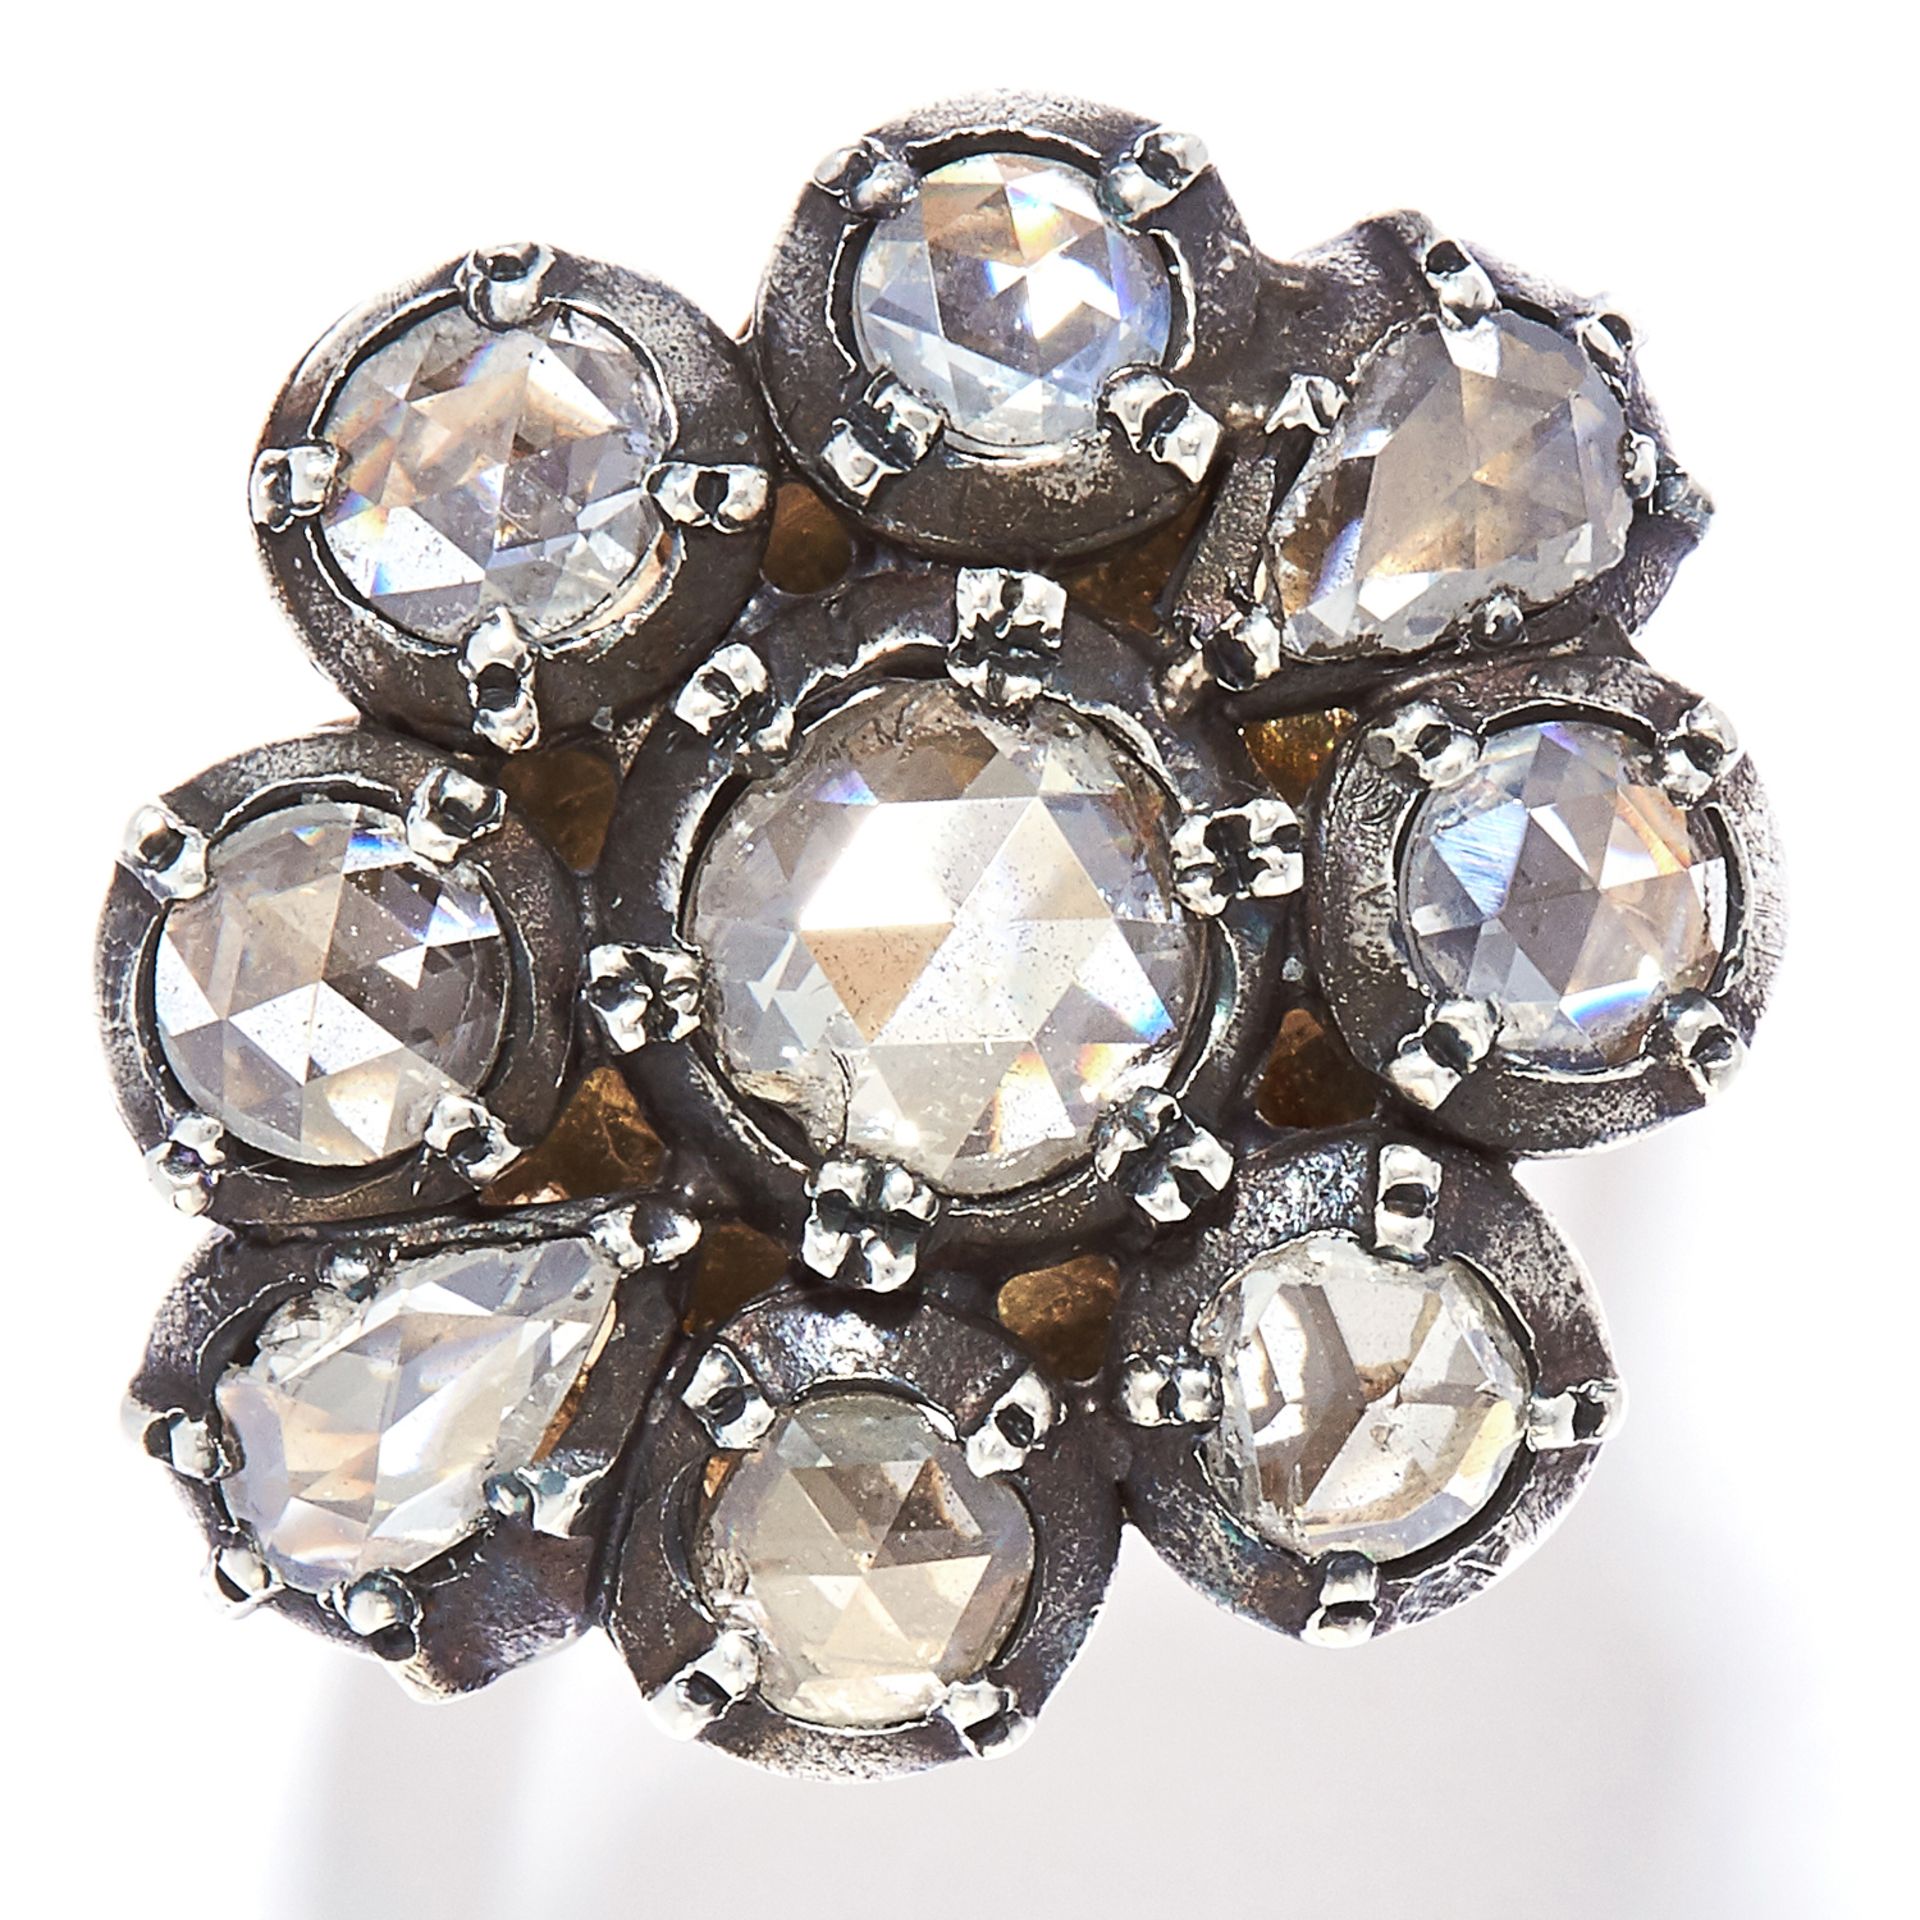 ANTIQUE DIAMOND CLUSTER RING, 19TH CENTURY in yellow gold and silver, set with a cluster of nine